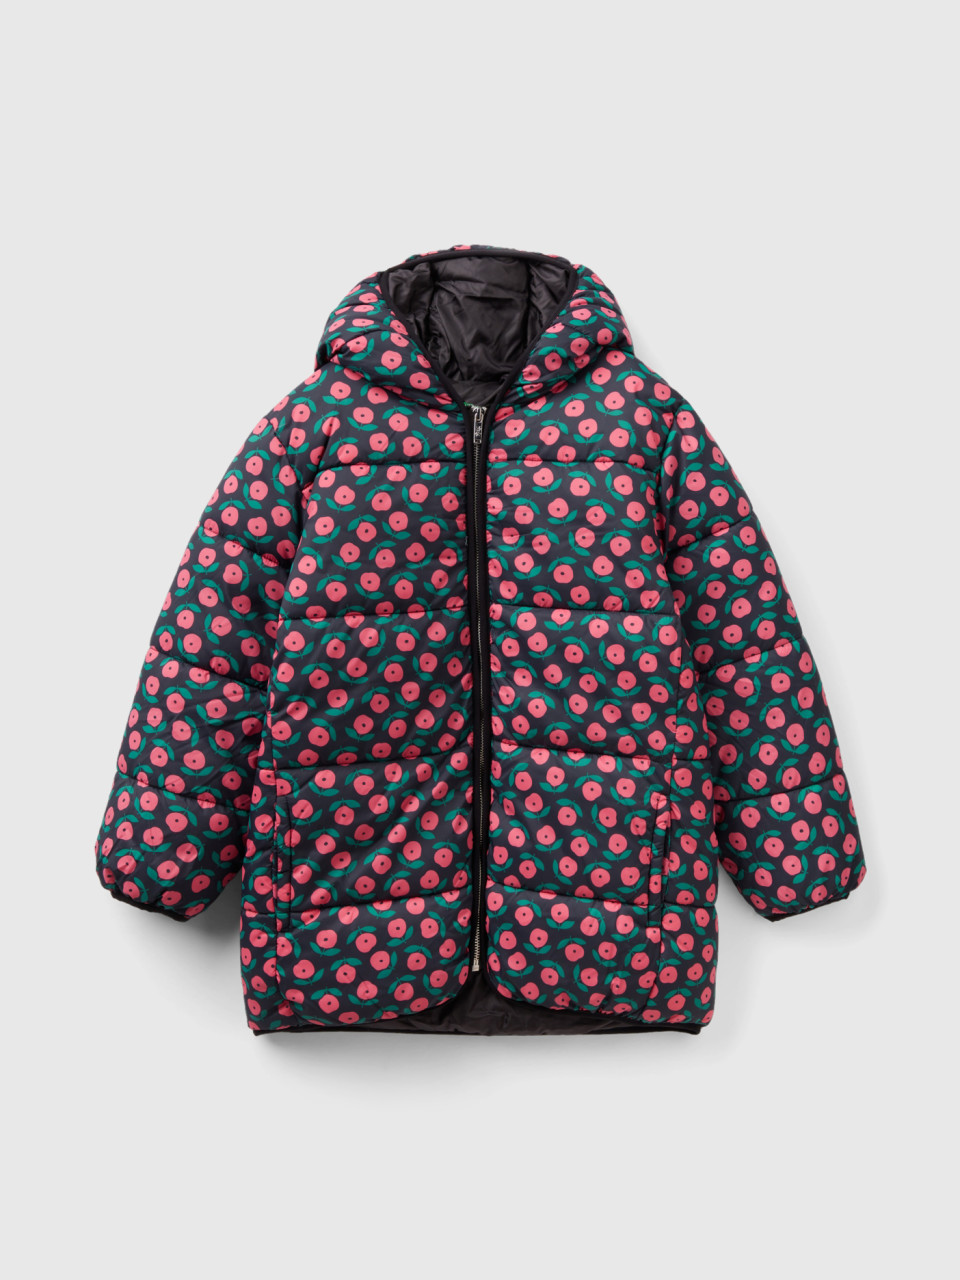 Benetton, Oversized Fit Jacket With Floral Print, Multi-color, Kids